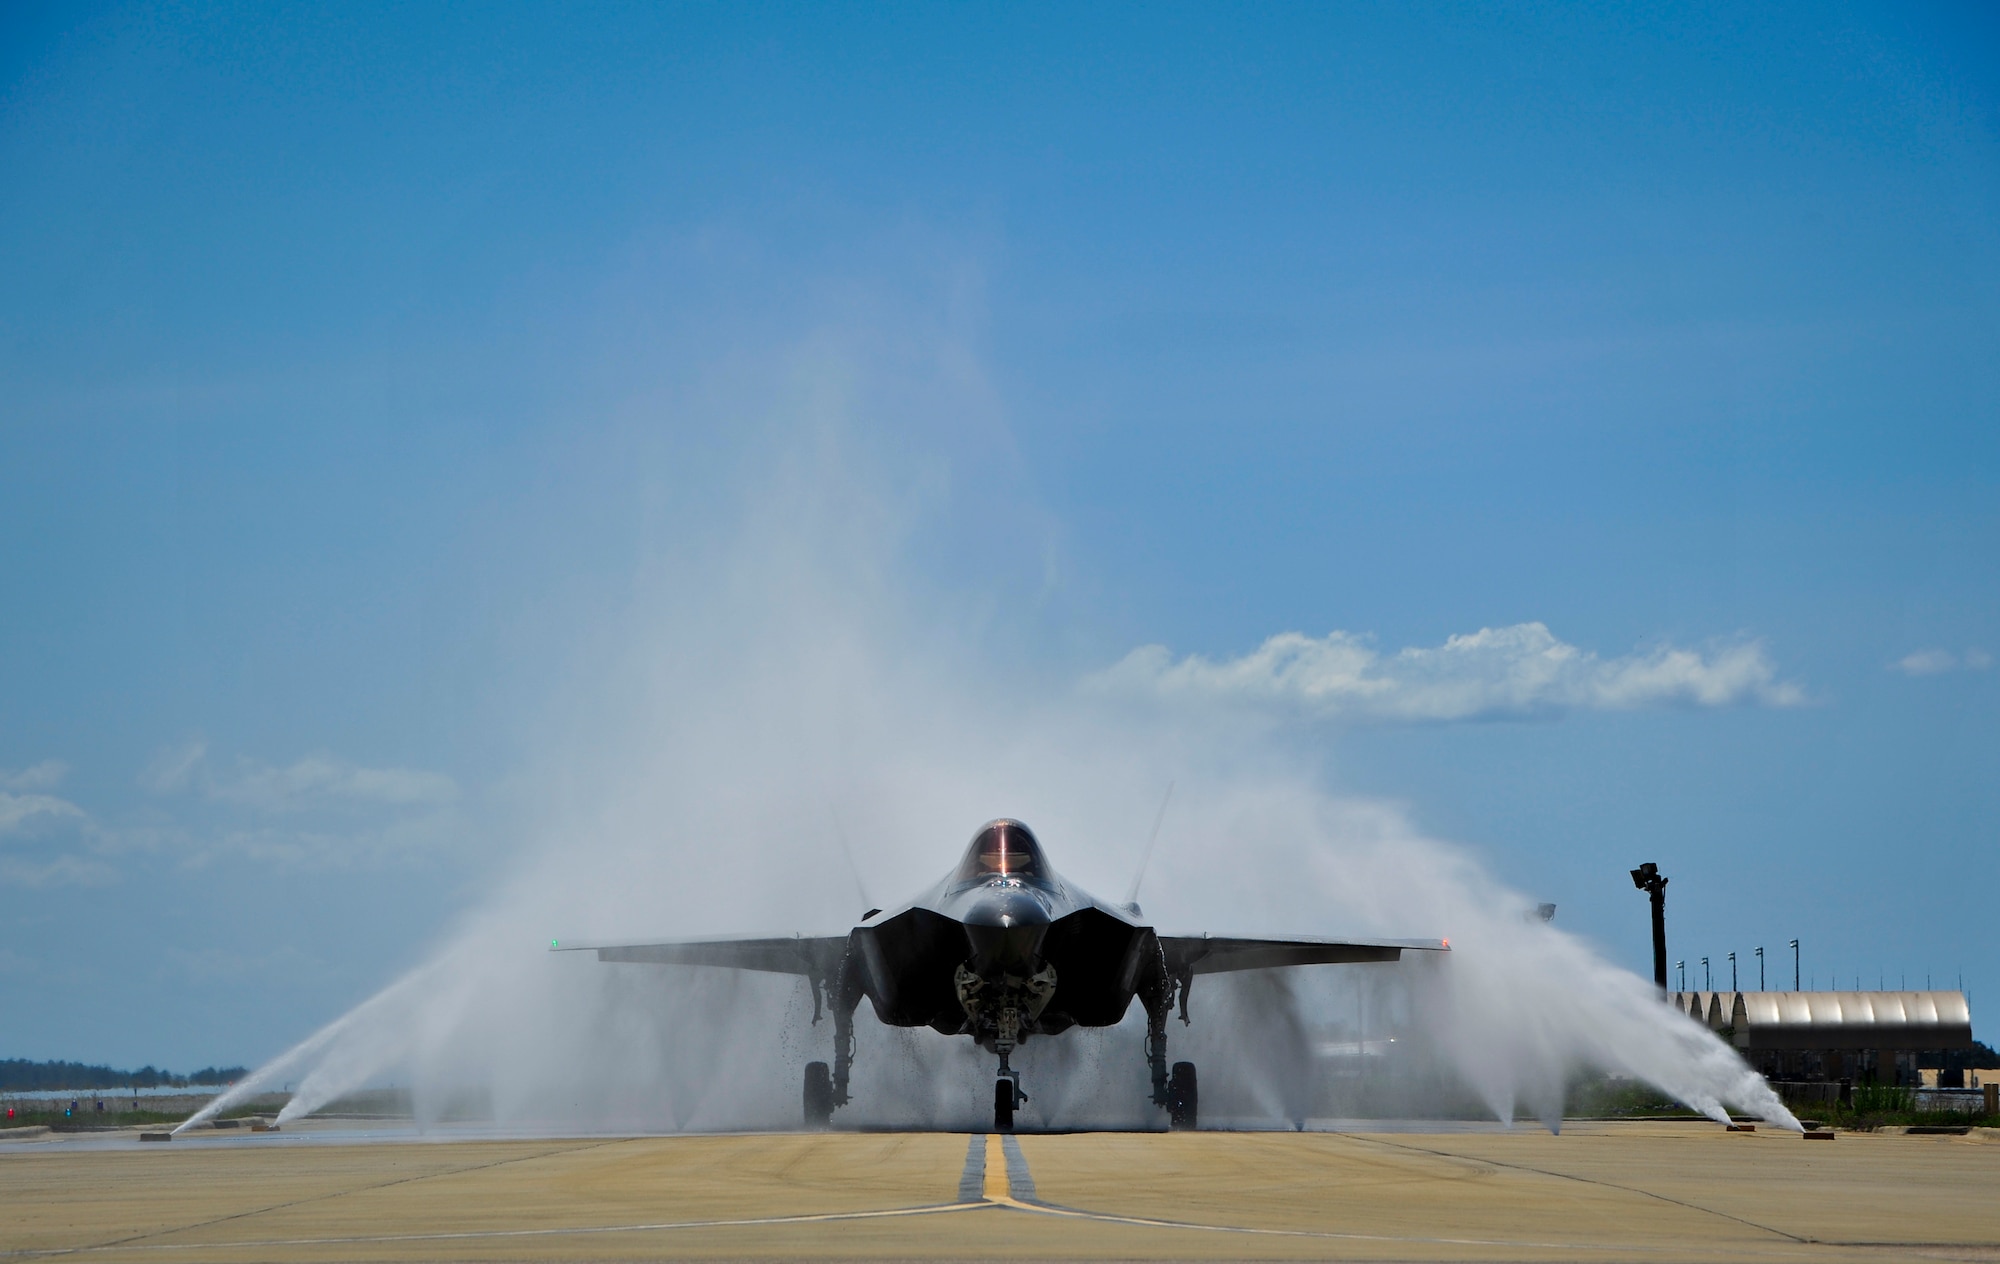 Lt. Col. Christine Mau, 33rd Operations Group deputy commander, navigates her F-35A through the “bird bath” after returning from her first flight on Eglin Air Force Base, Florida, May 5, 2015. Mau, who previously flew F-15E Strike Eagles, made history as the first female F-35 pilot in the program. (U.S. Air Force photo/Staff Sgt. Marleah Robertson)